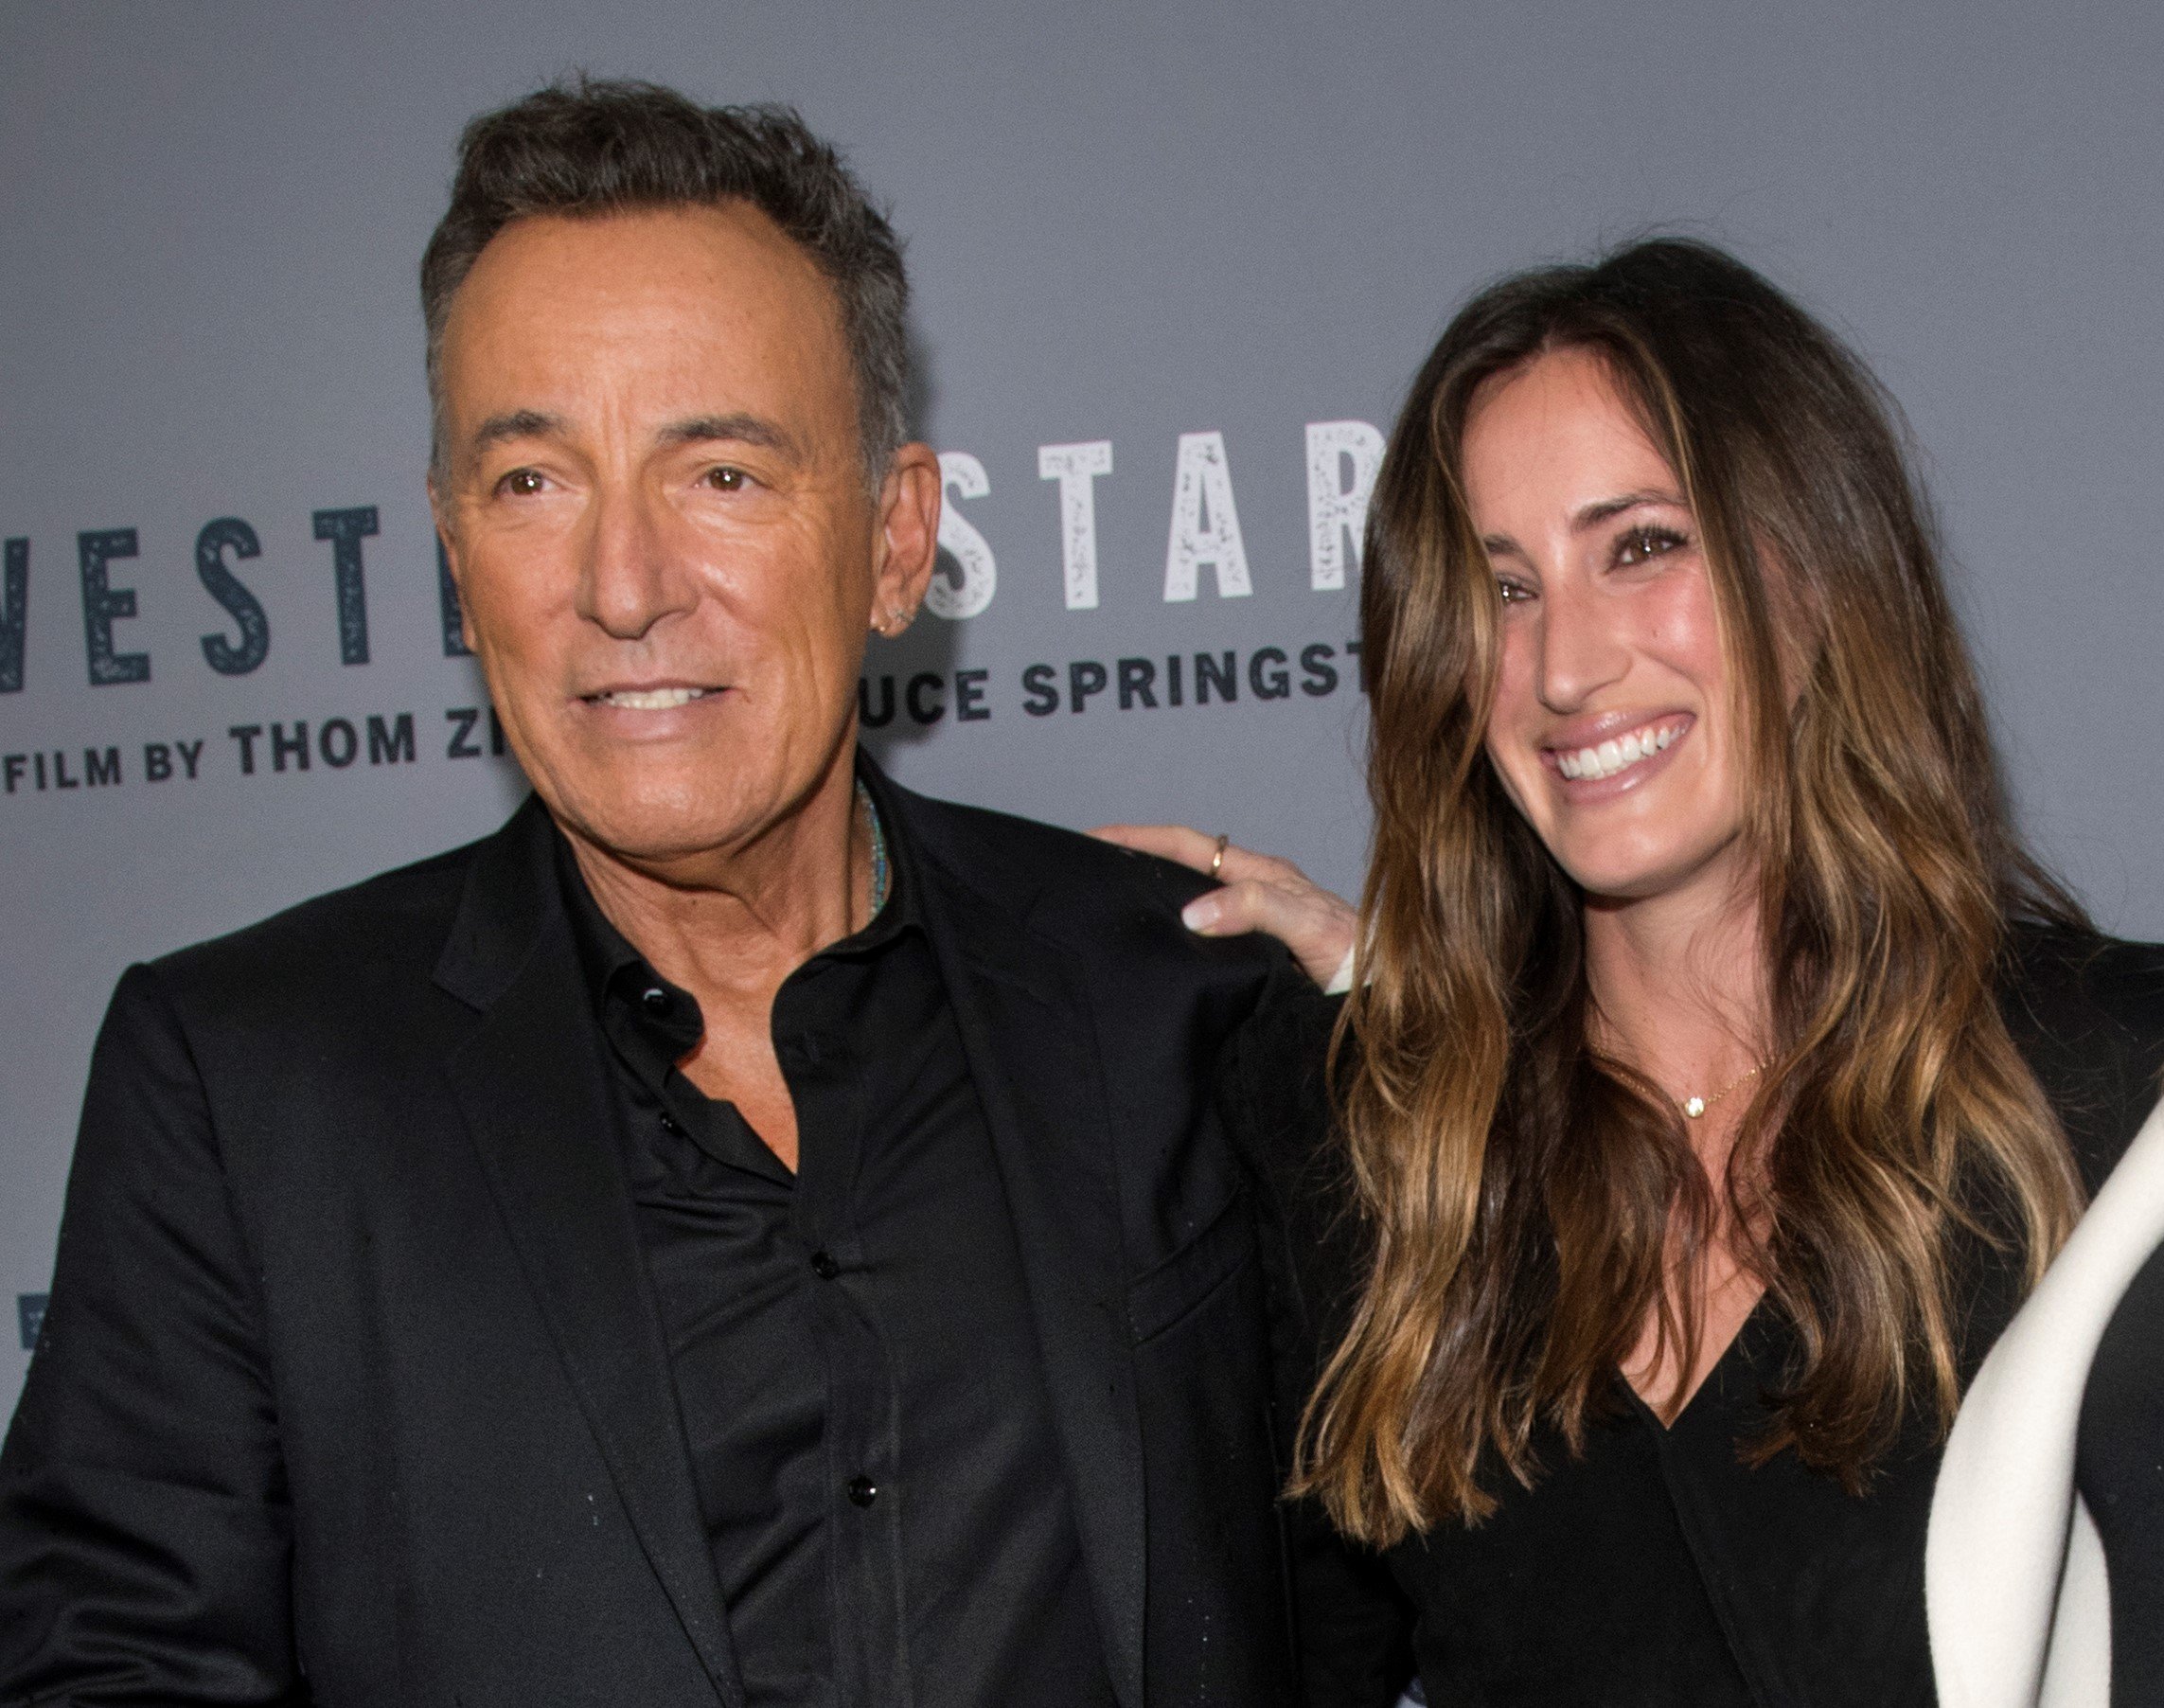 Bruce Springsteen poses with daughter Jessica Springsteen at movie premiere in 2019